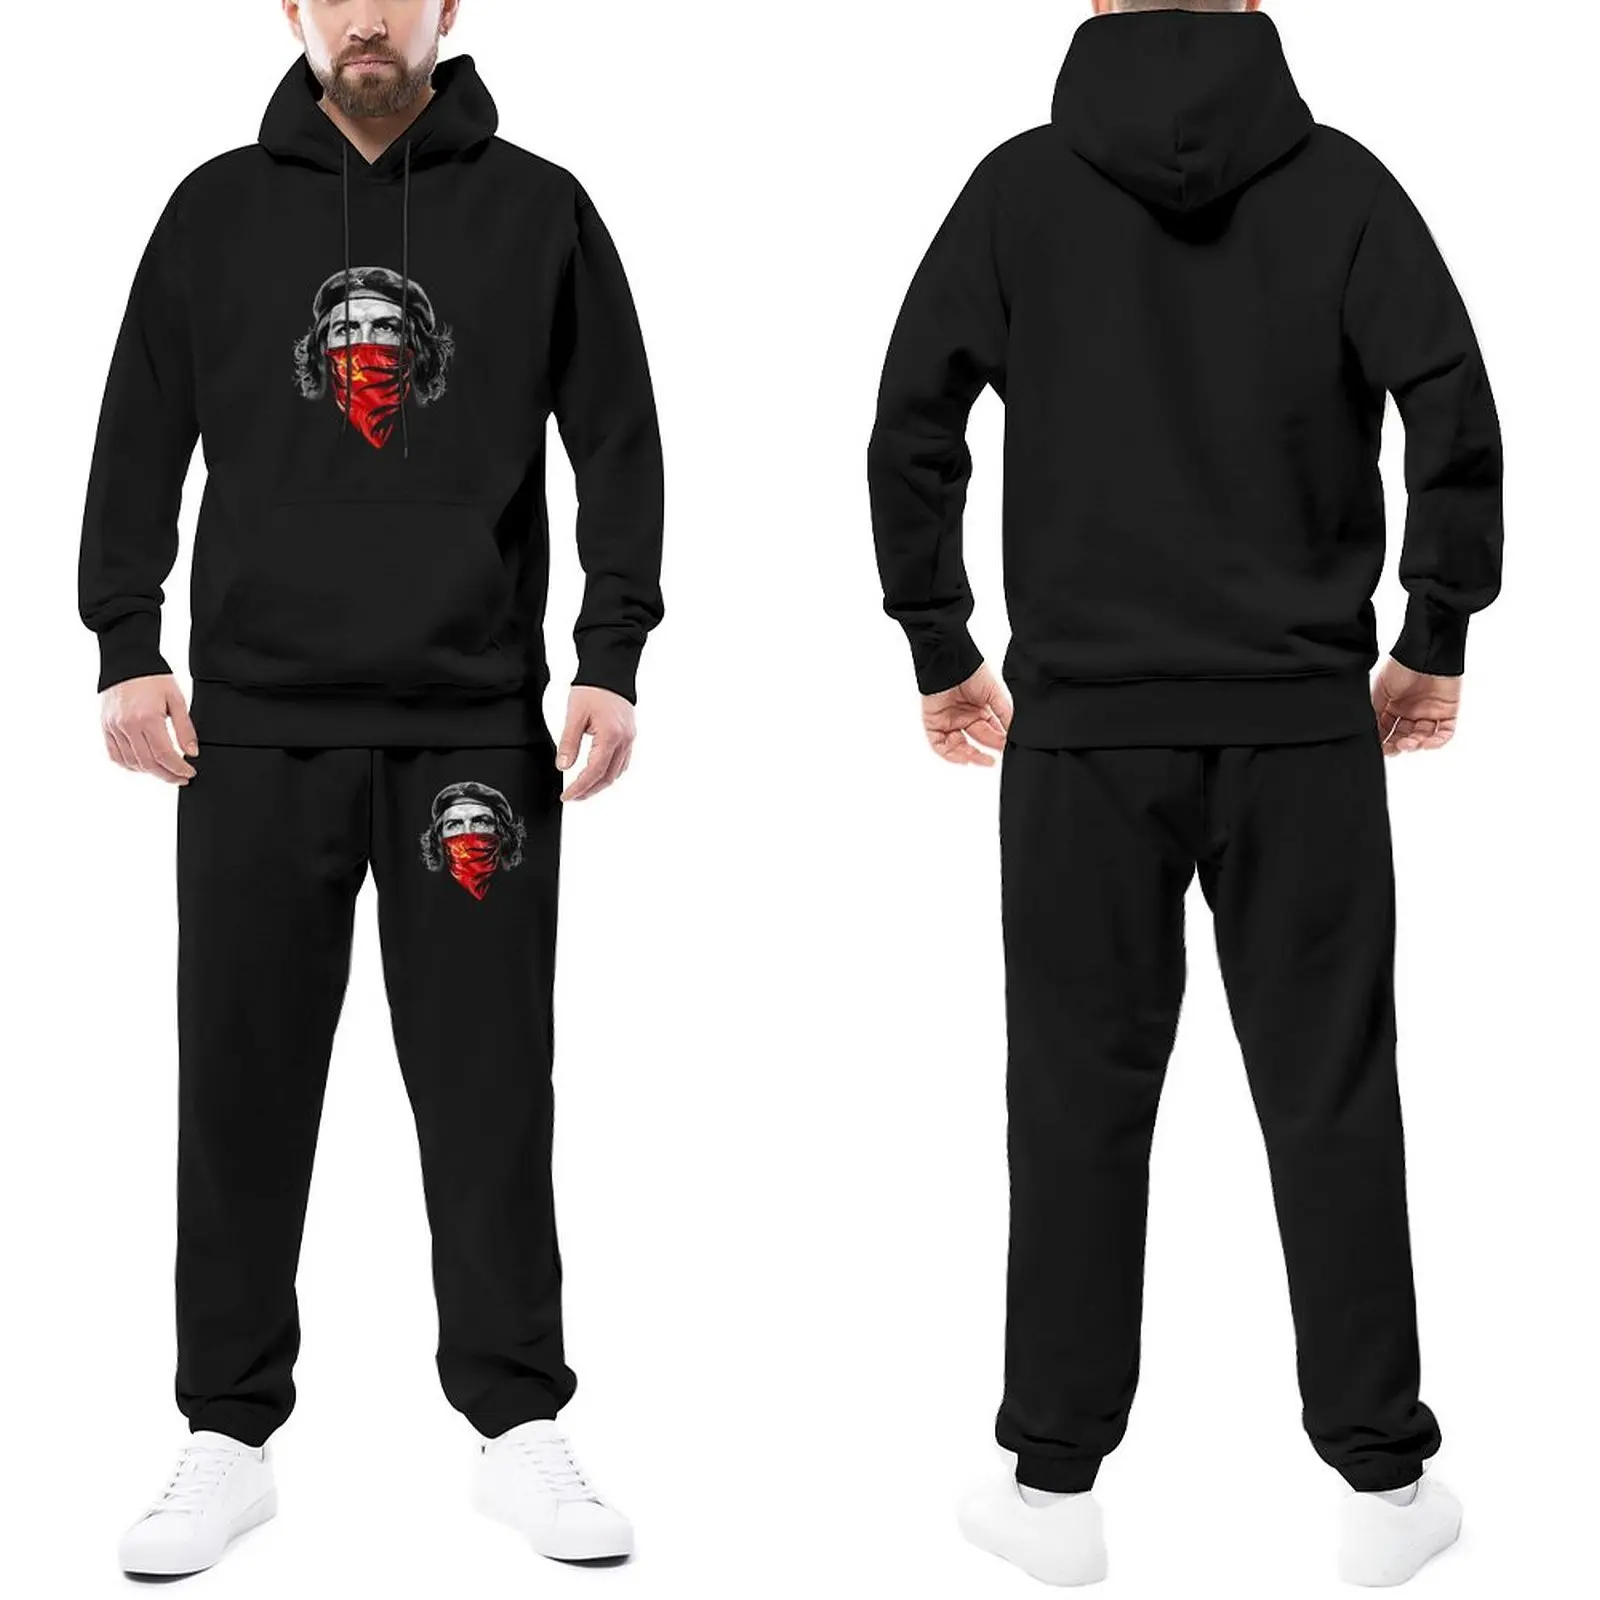 

Che Guevara Masked Tracksuits Unisex Celebrity Hoody Sweatpant Set 2 Piece Fashion Hooded Suits Date Trendy Jogger Sportswear